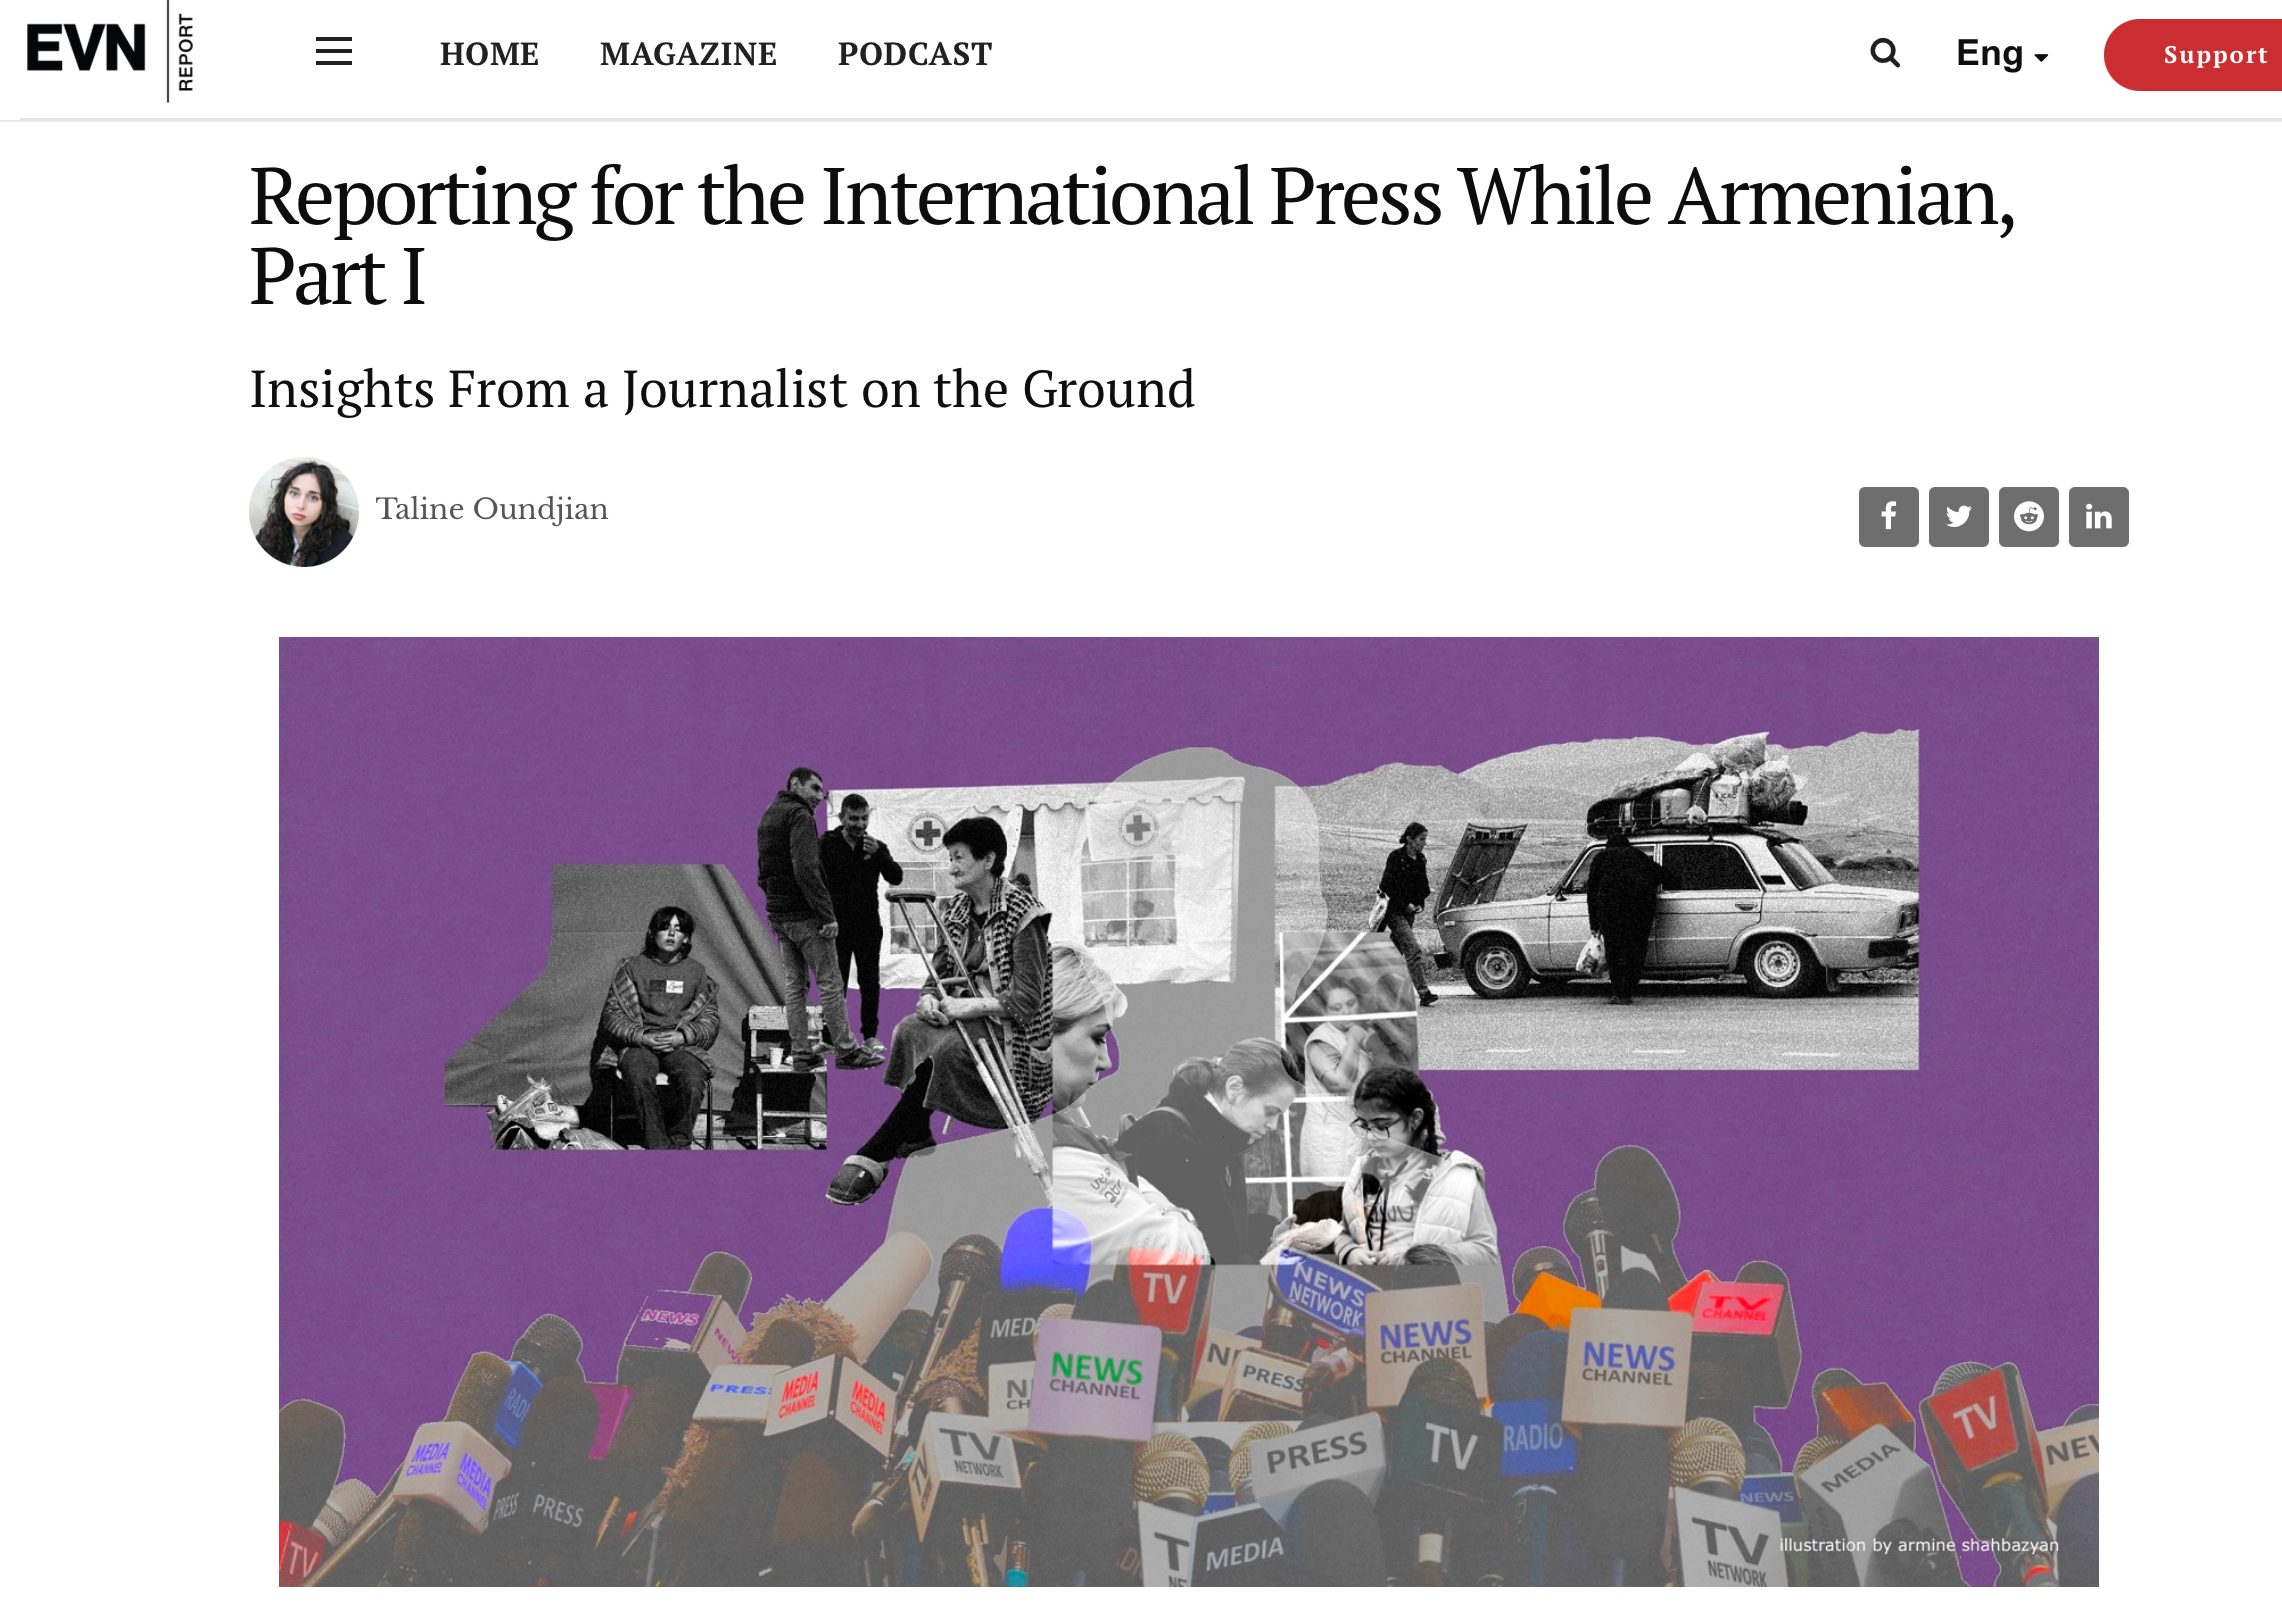 Taline Oundjian and the challenges of Armenian journalists while reporting for the international media